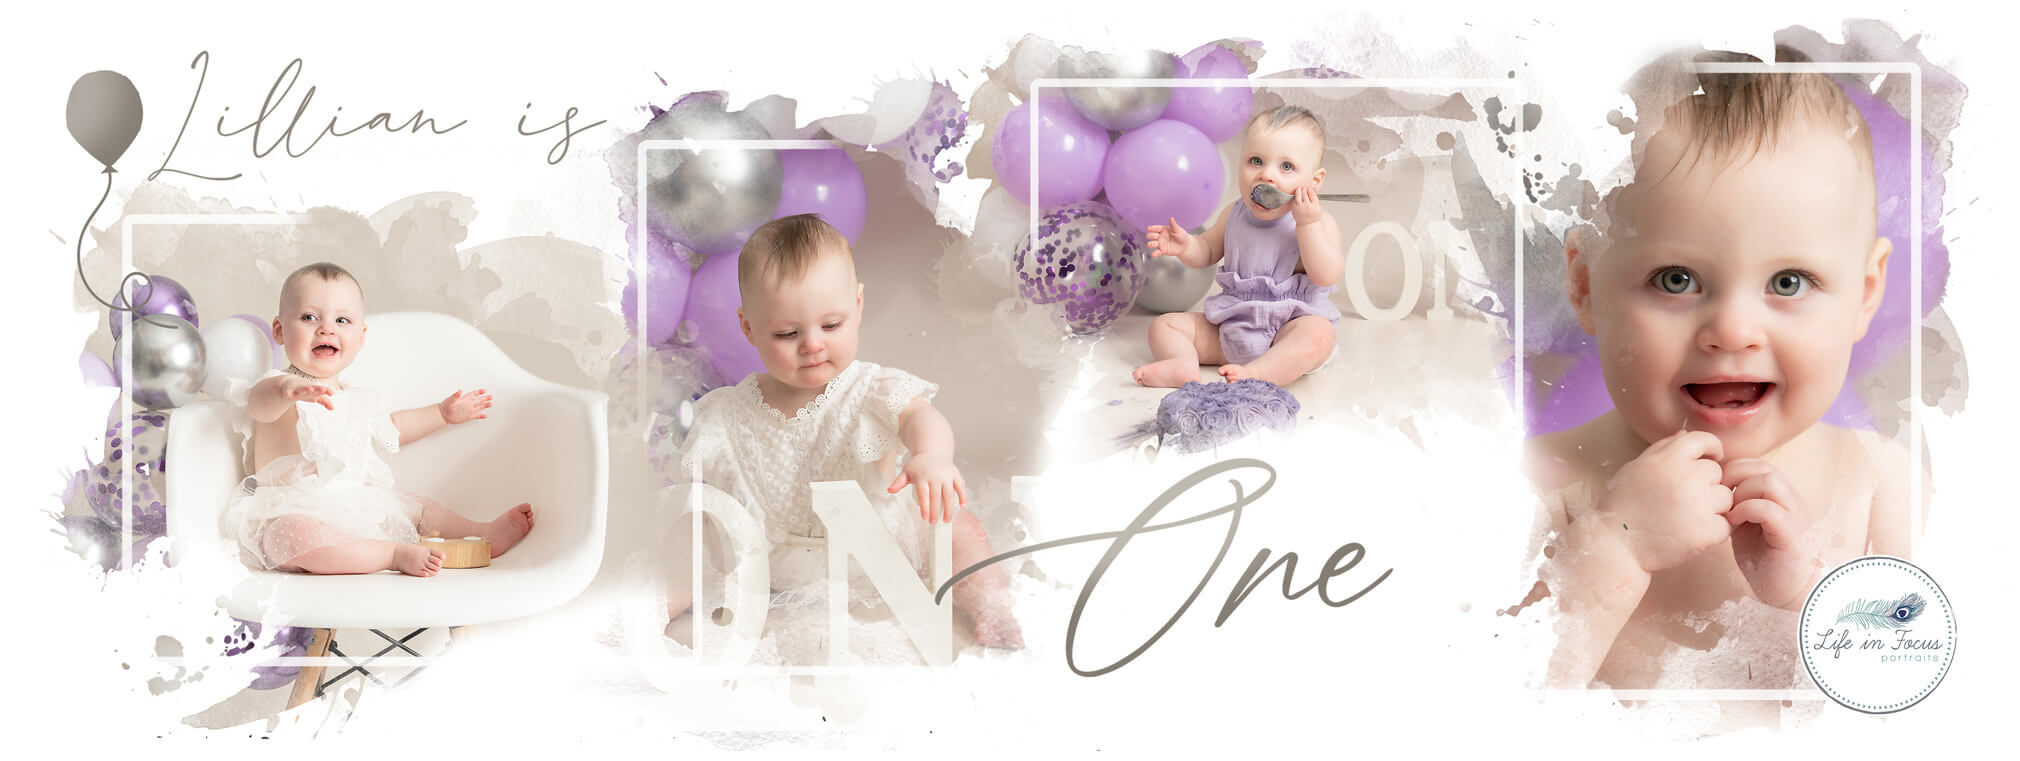 photos of baby gorl in white romper with birthday cake and lilac balloons cake smash photos